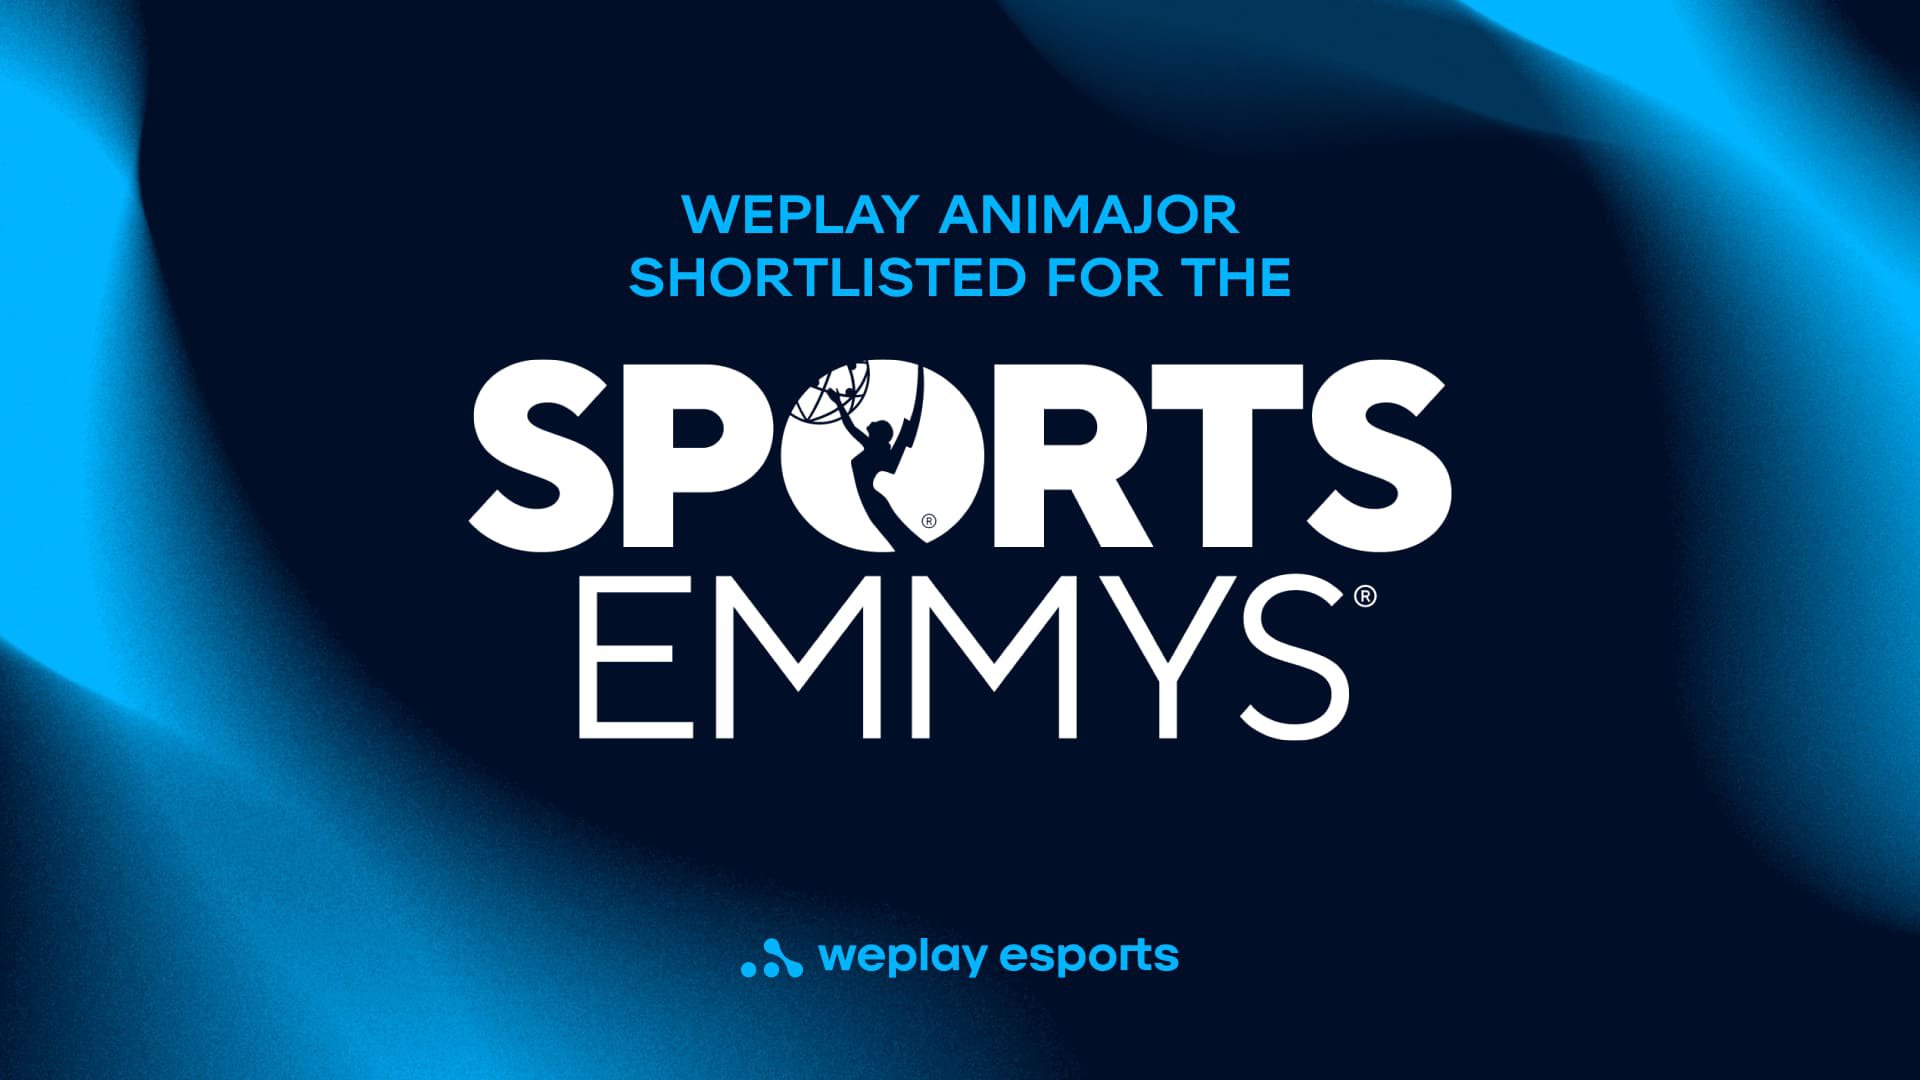 WePlay AniMajor has been shortlisted for the Sports Emmy Awards. Visual: WePlay Holding